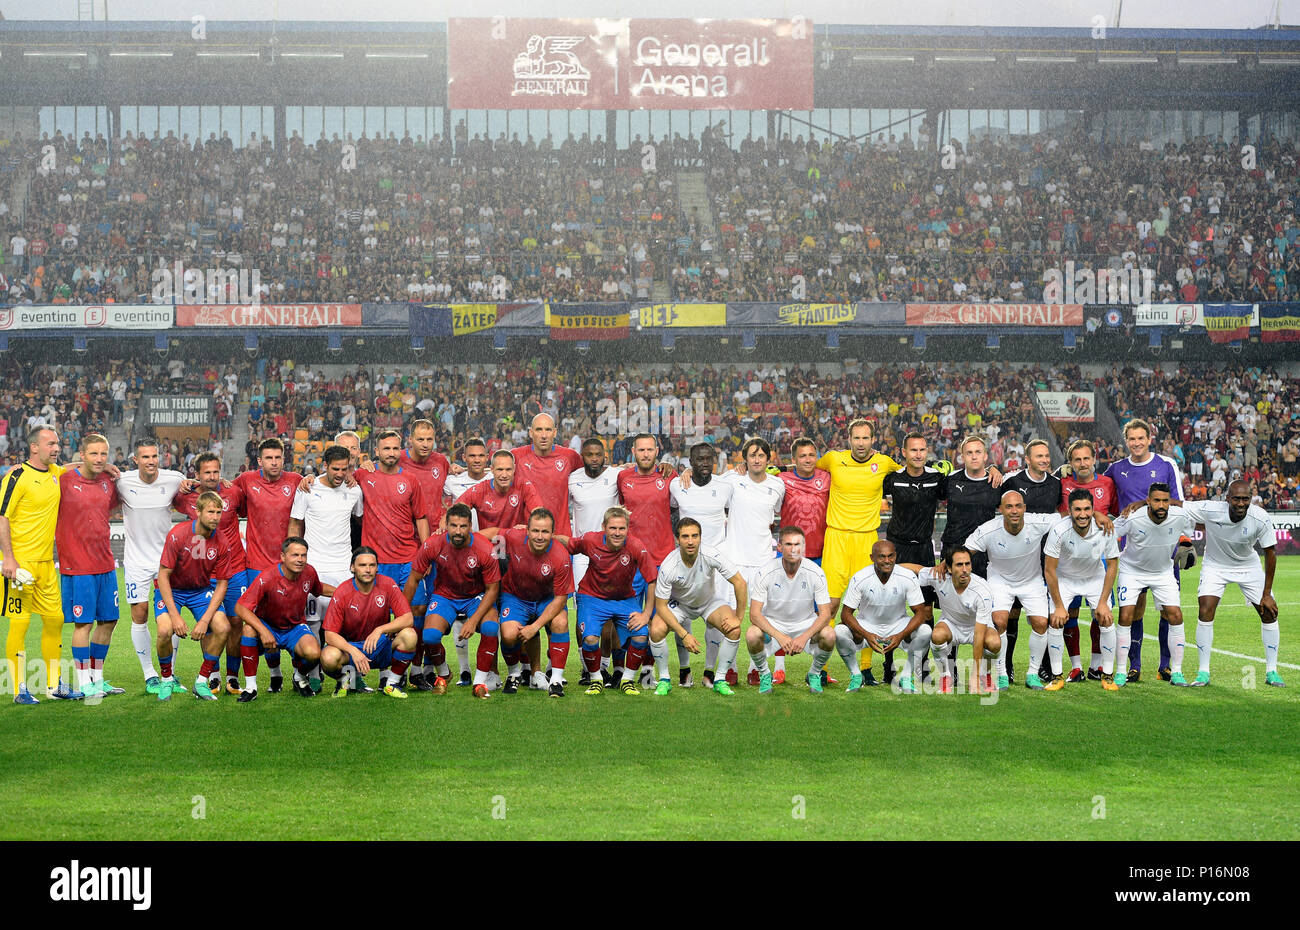 A family photo prior to the TR10 Czech Team vs Alex Song of TR10 World Team match. Former captain of the Czech national football team Tomas Rosicky definitely ended his career at the age of 37 in a farewell match played despite a driving cloudburst which postponed its kickoff today, on Saturday, June 9, 2018. The Czech team, in which he played, defeated the 'team of the world,' composed of his former fellow players from Borussia Dortmund and Arsenal London, 5-2. The final goal was scored by Rosicky's four-year-old son Tomas. Weather complicated the farewell match as roughly 20 minutes before i Stock Photo